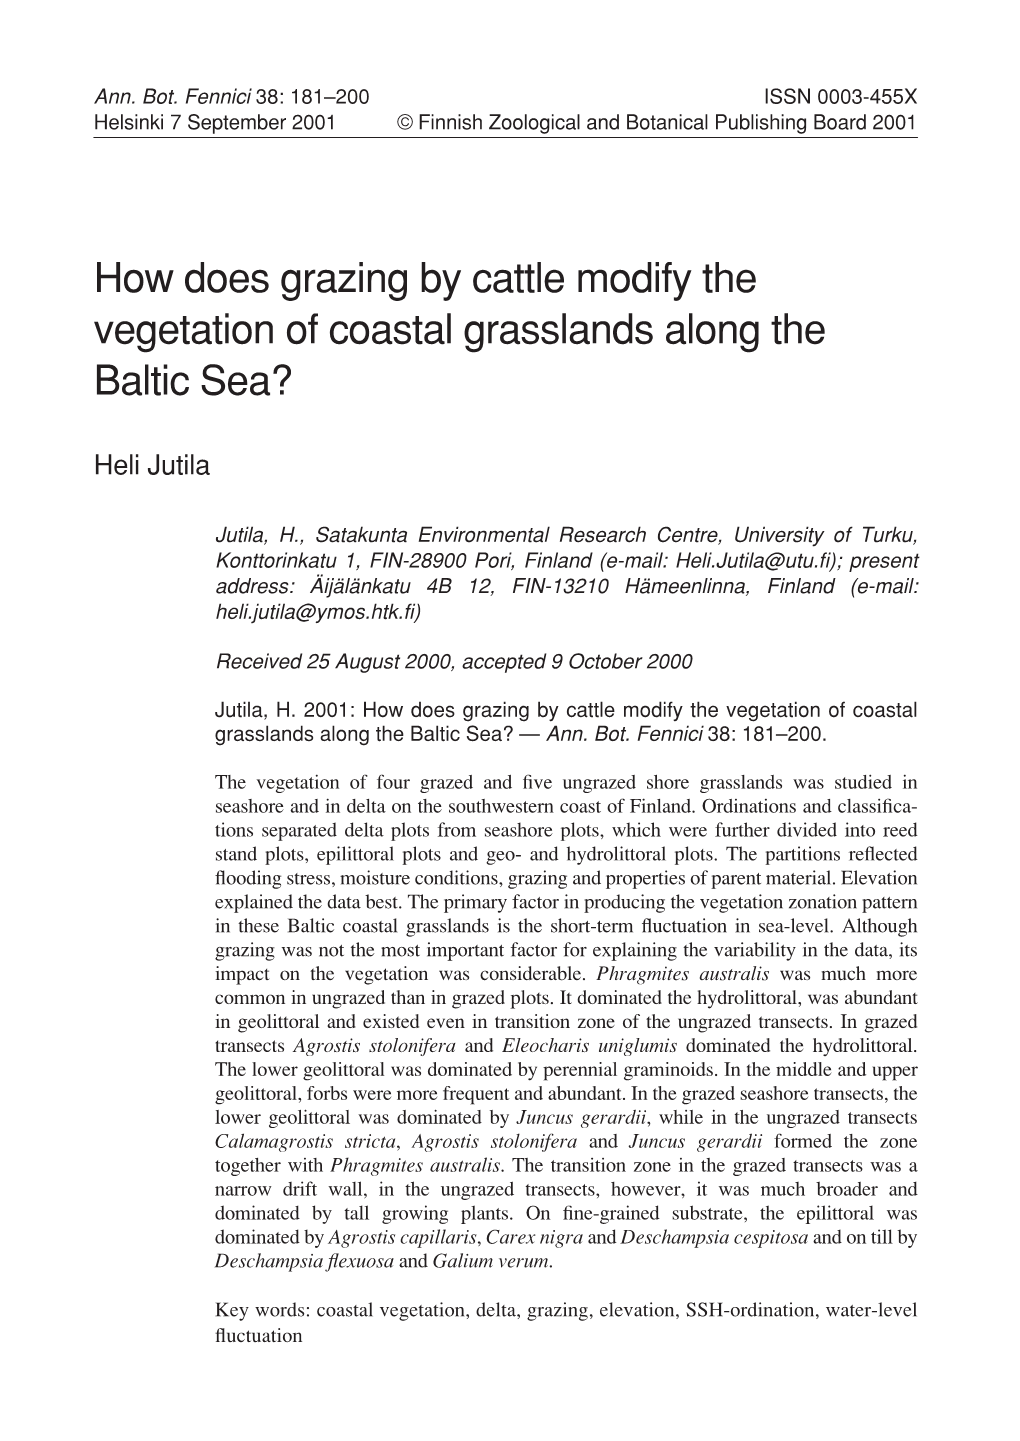 How Does Grazing by Cattle Modify the Vegetation of Coastal Grasslands Along the Baltic Sea?